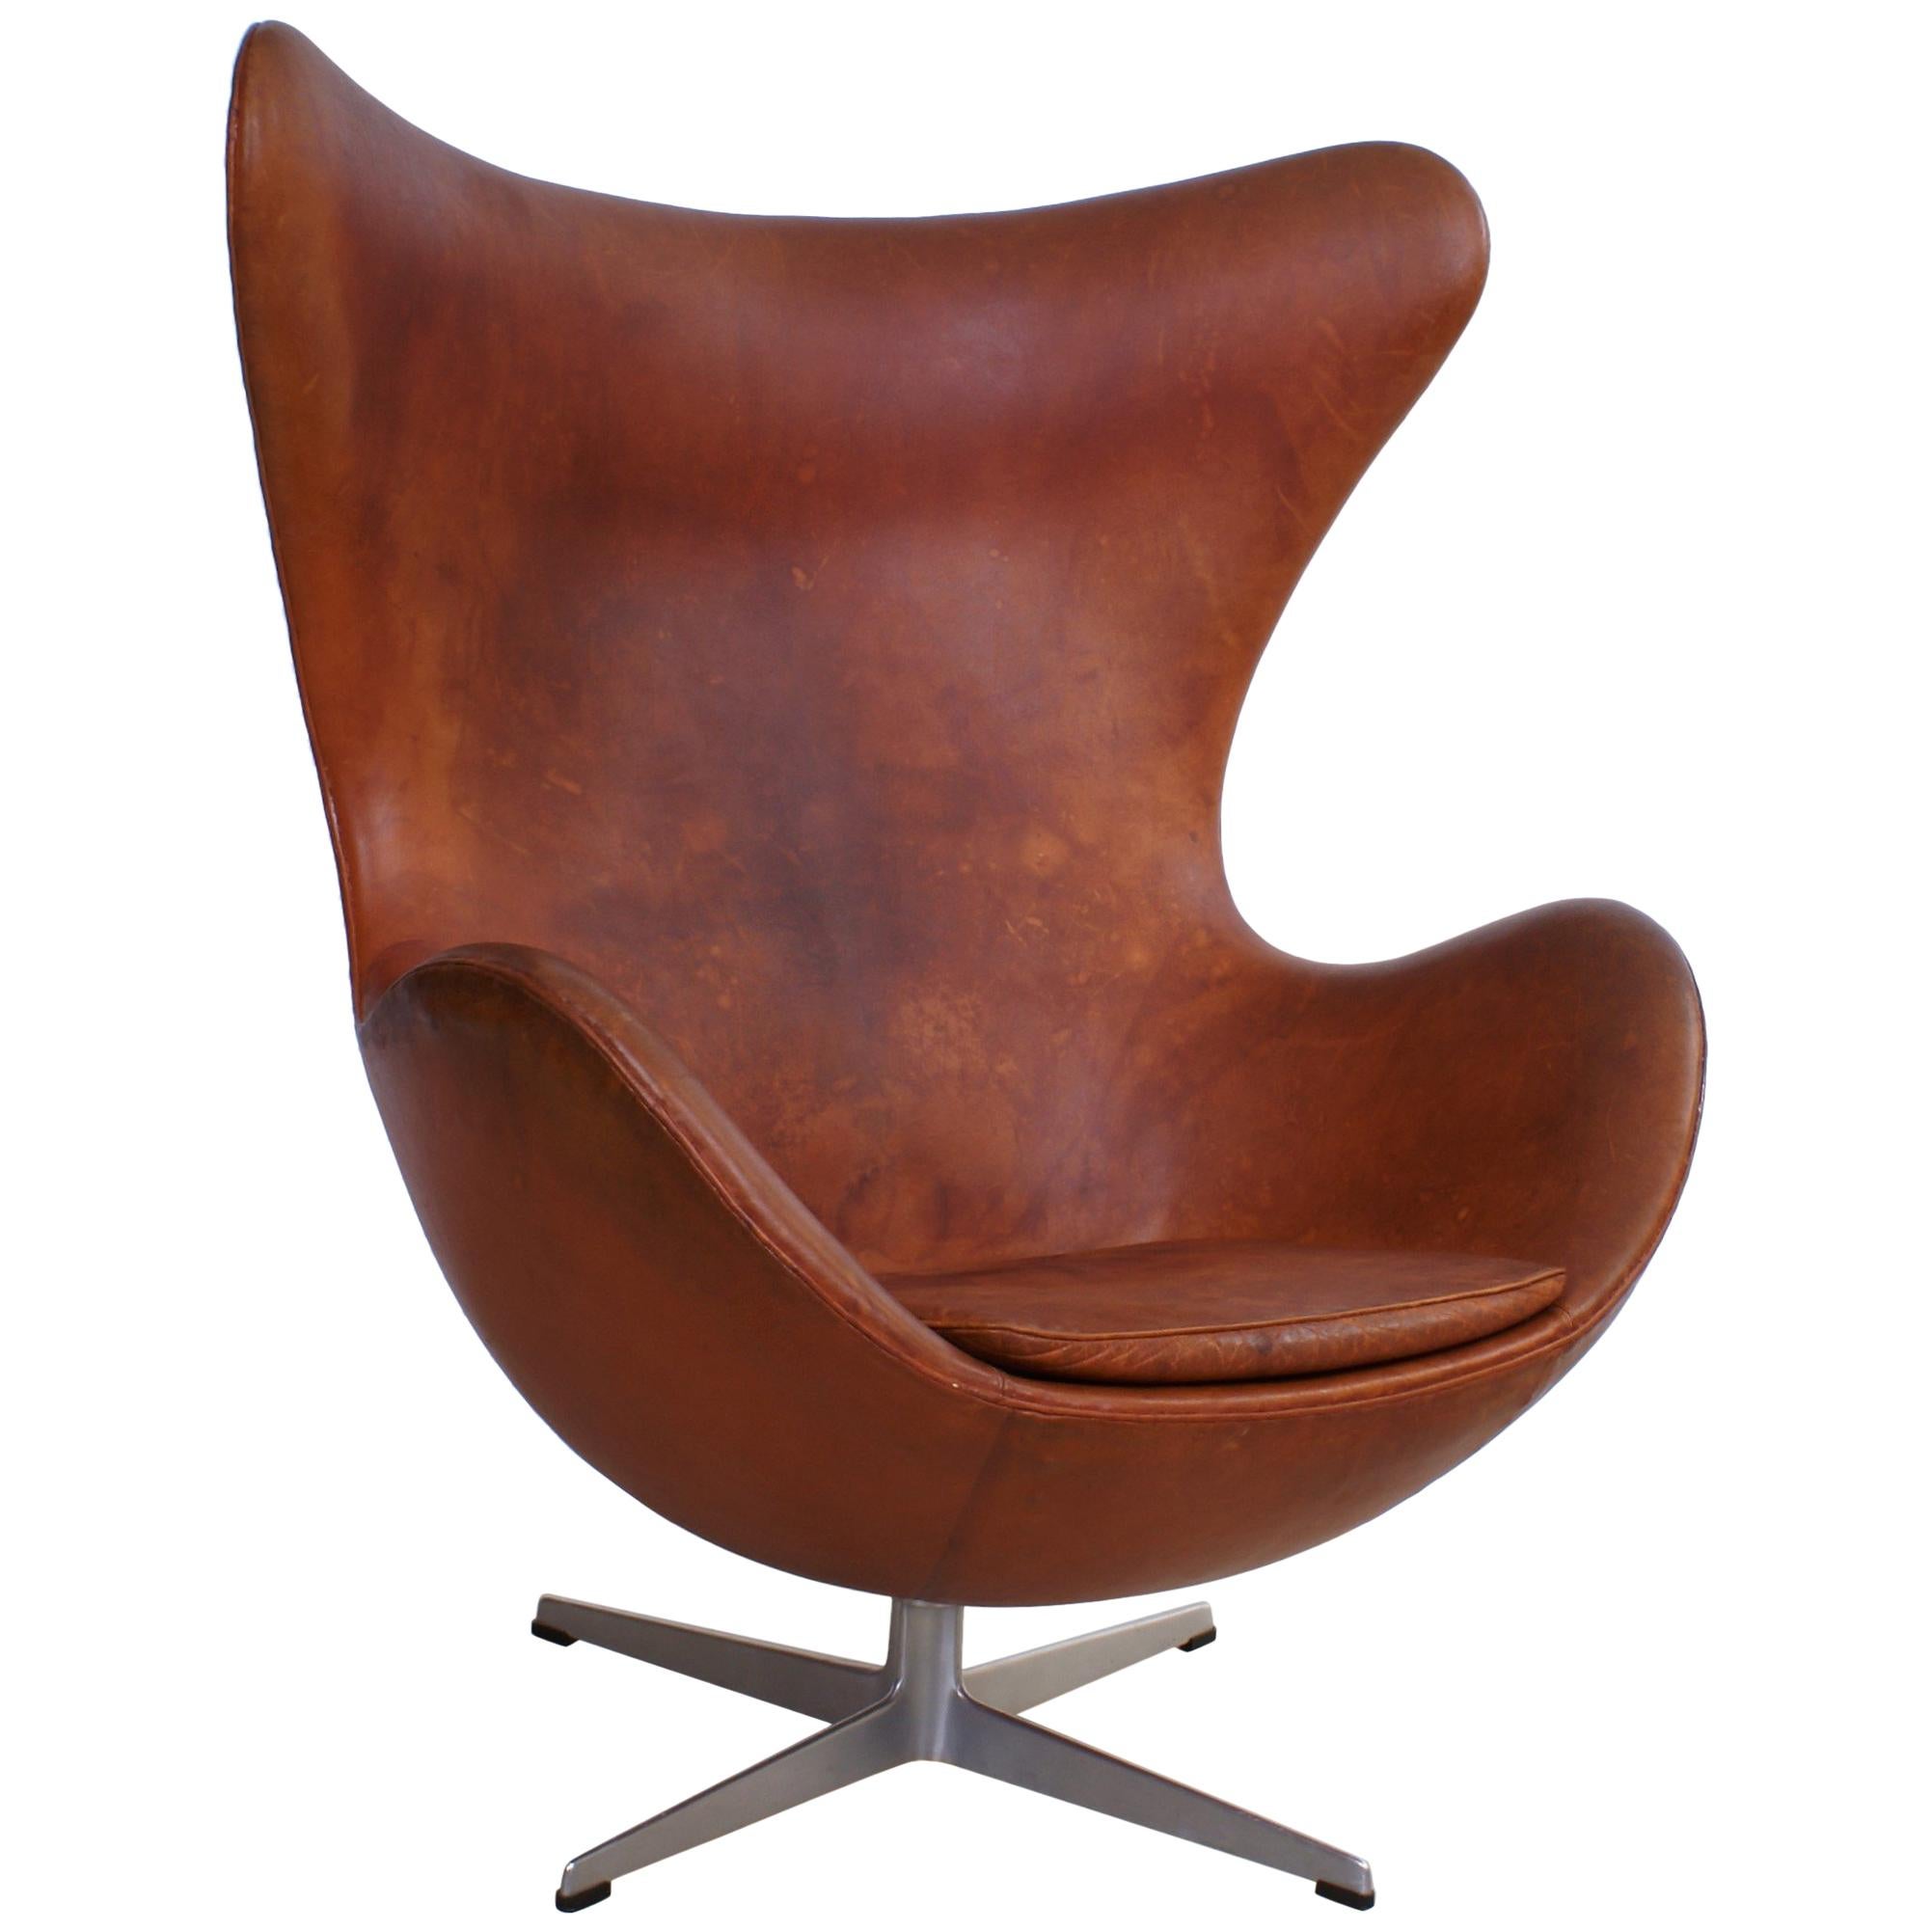 Arne Jacobsen Early Egg Chair in Original Patinated Natural Leather, 1960s